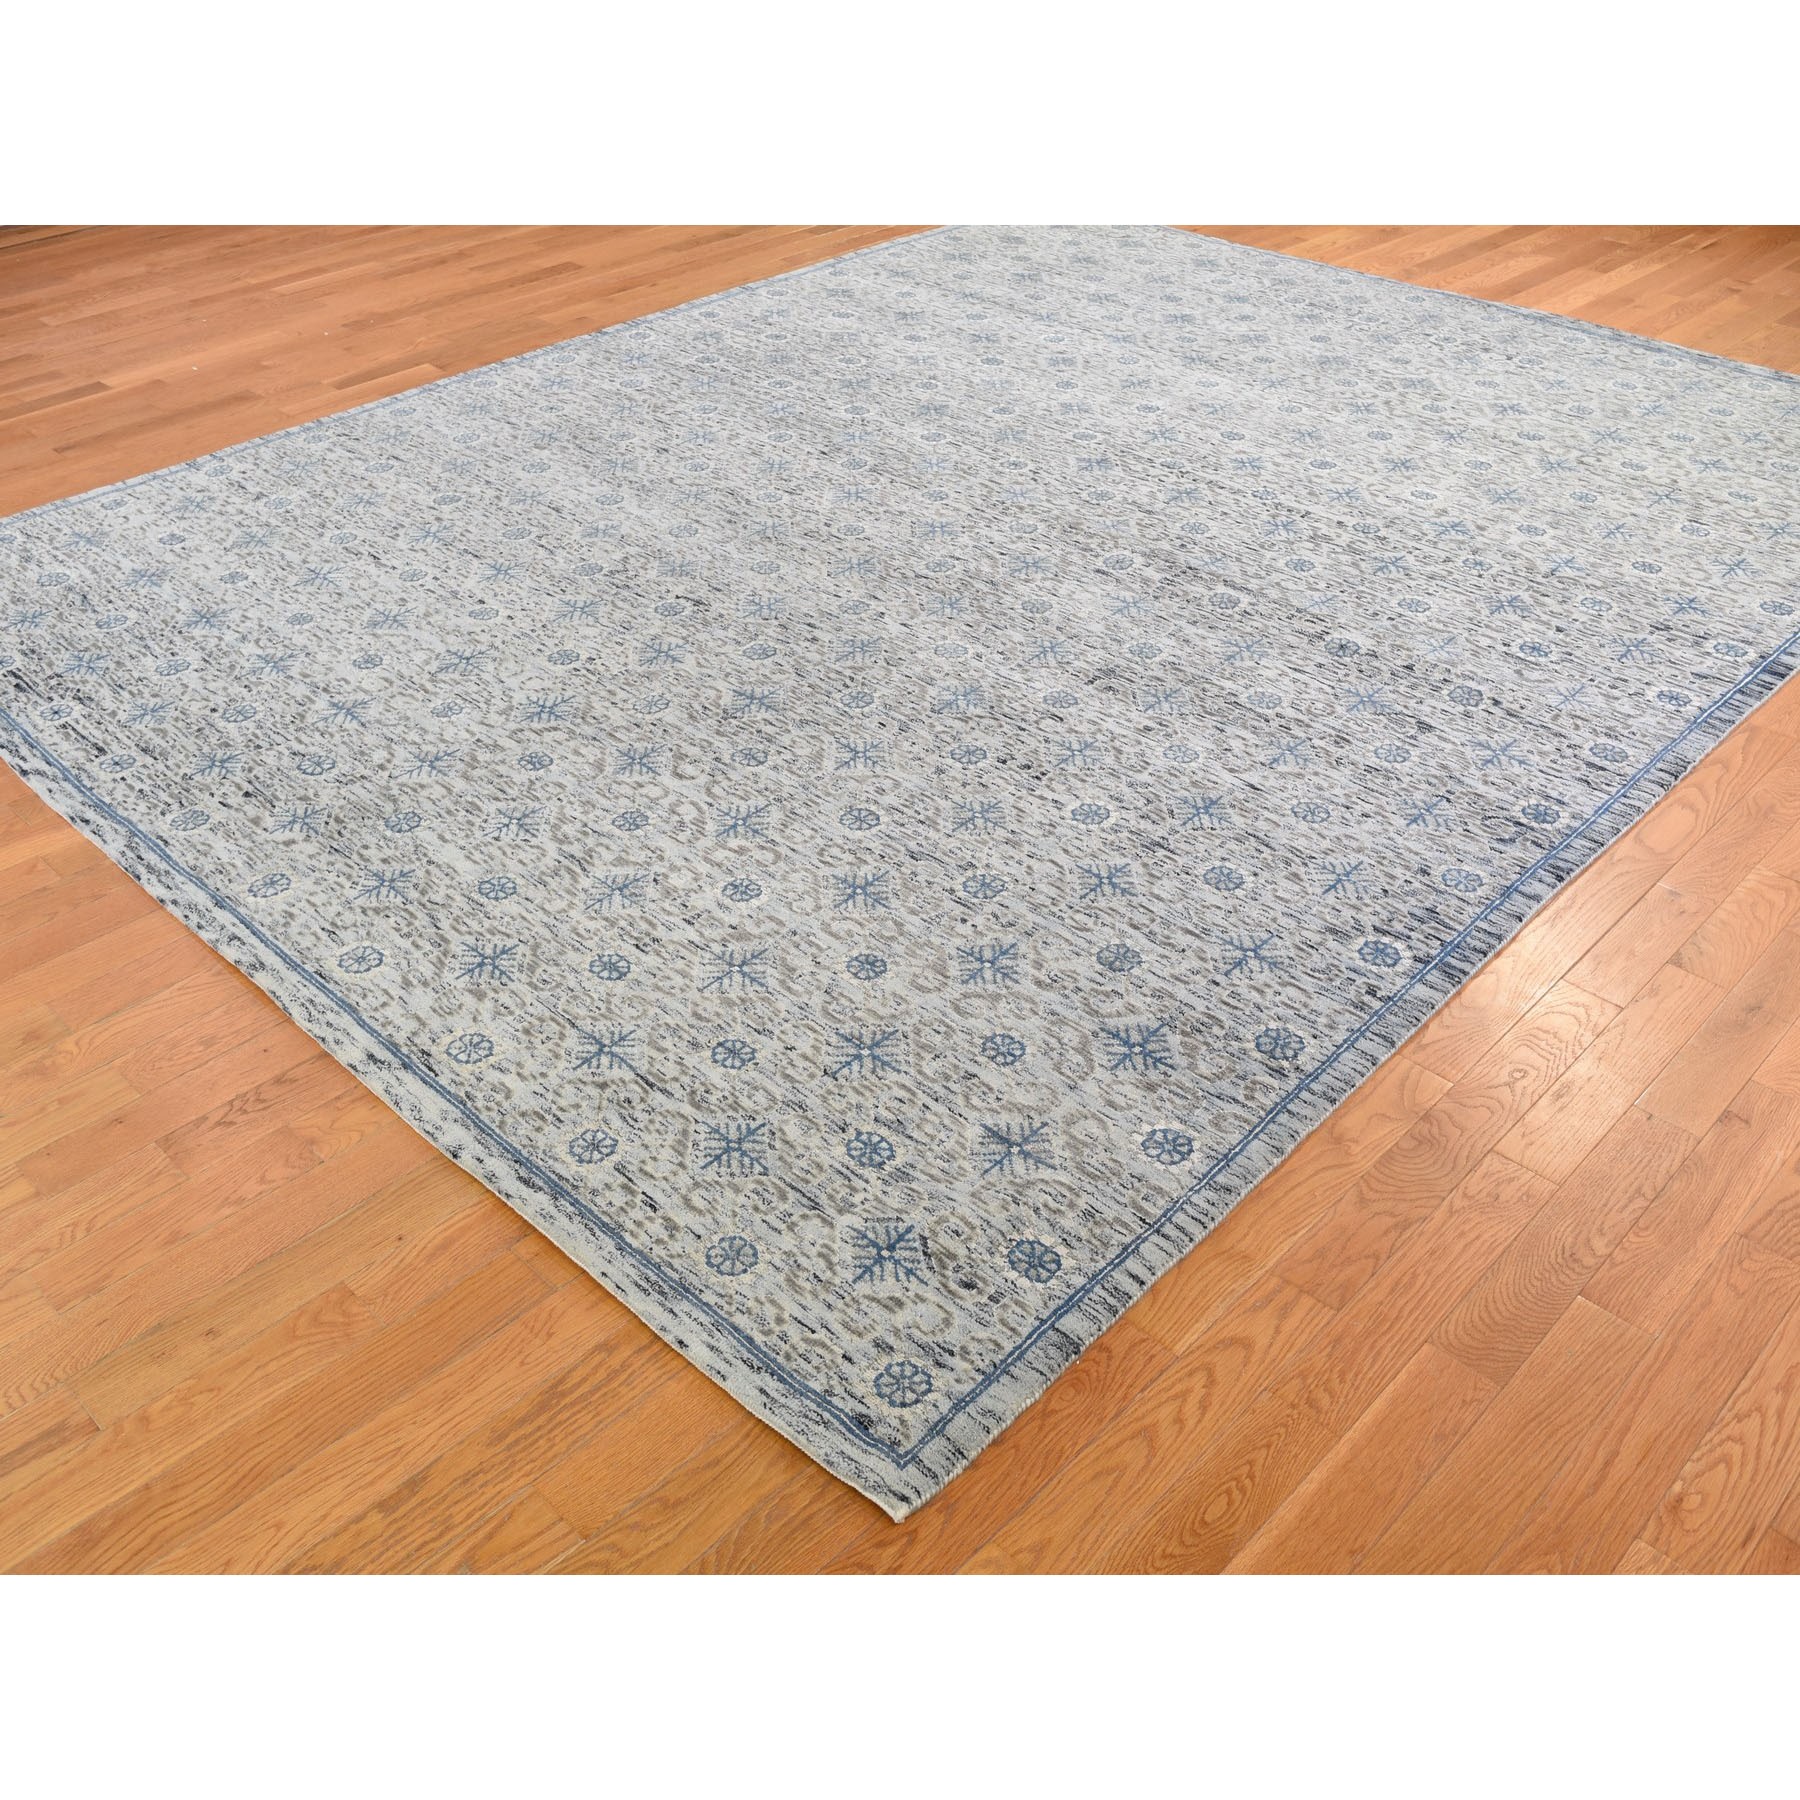 9-1 x11-9  Snow Flake Design Tone on Tone Woolen Hand Knotted Oriental Rug 